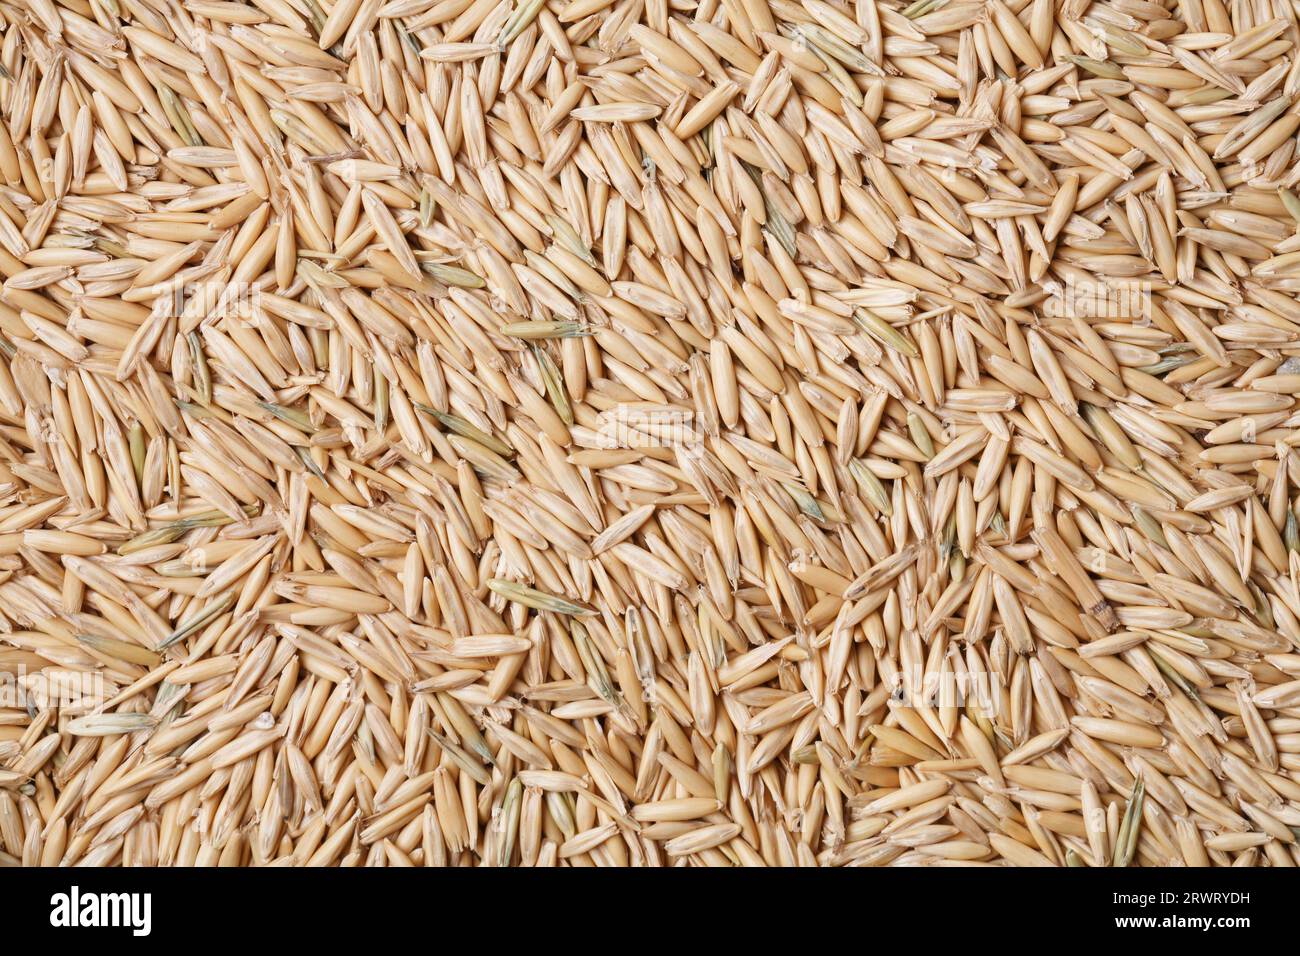 A Texture of oats seeds Stock Photo